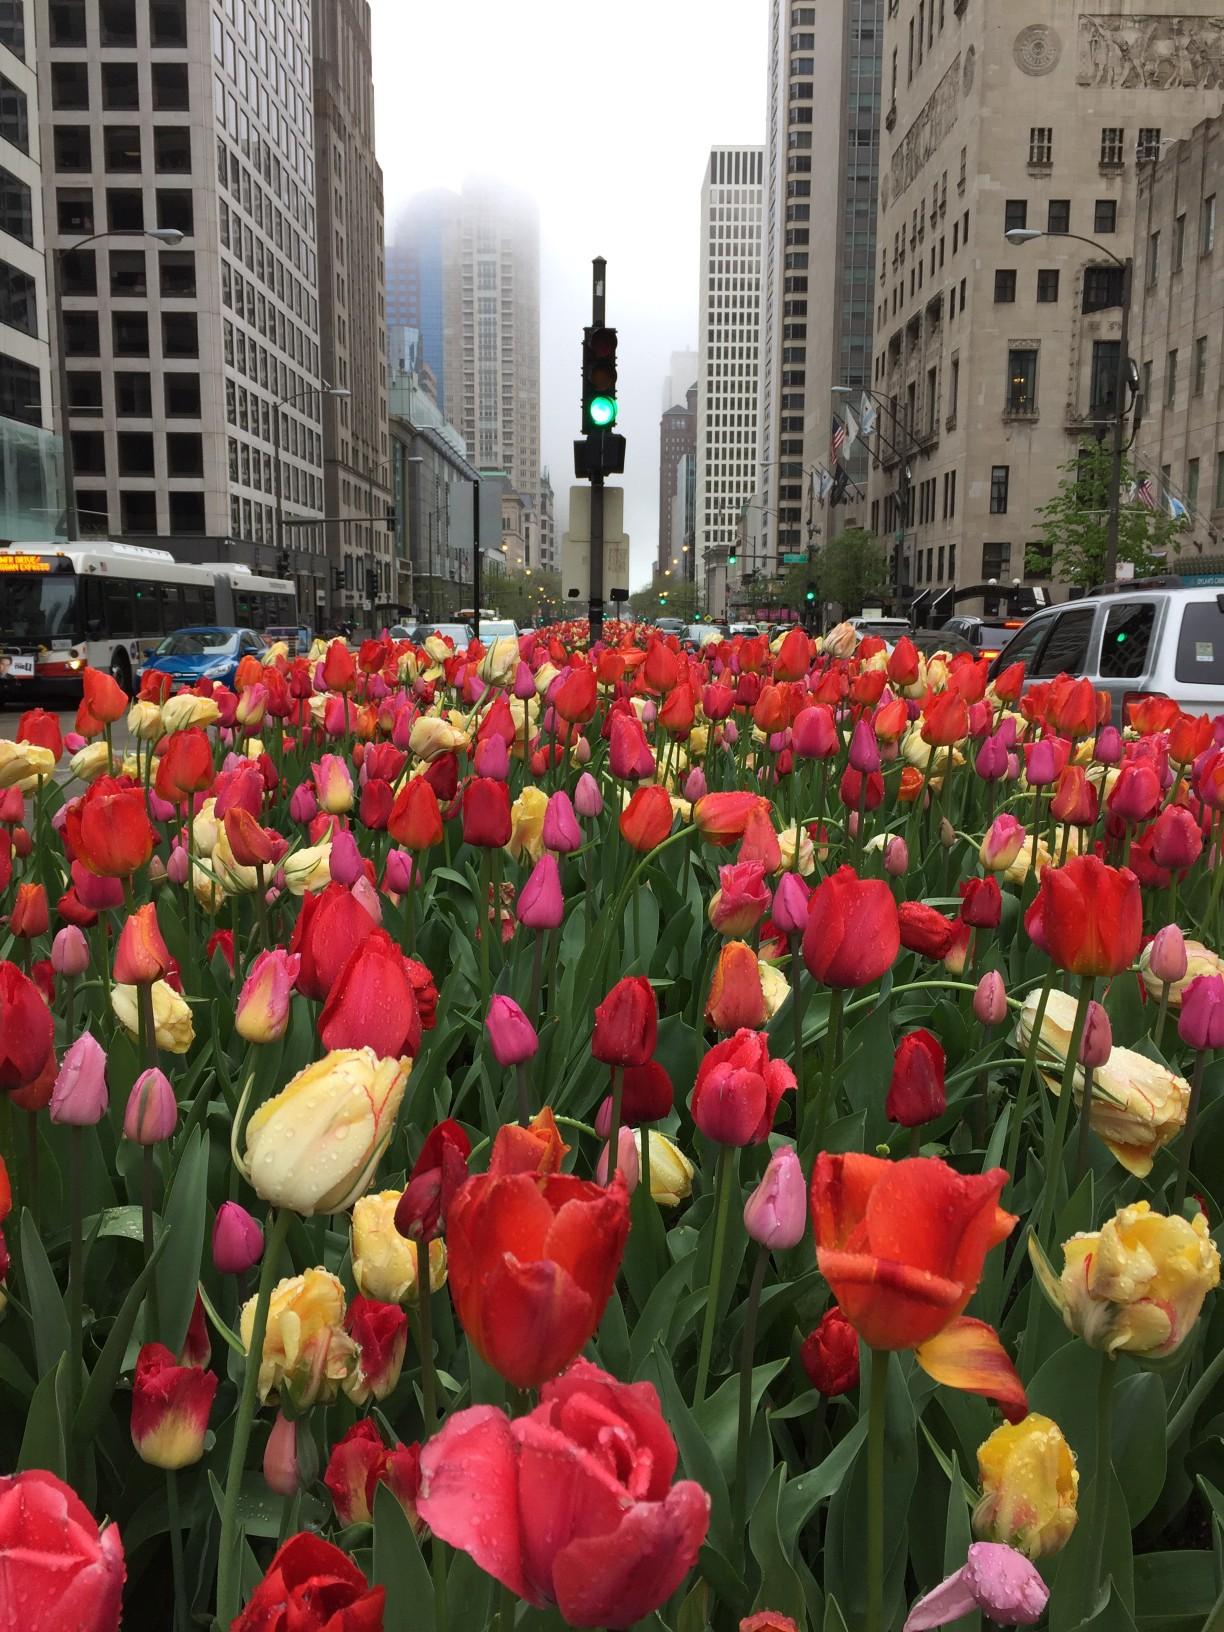 Tulips in bloom downtown Chicago.